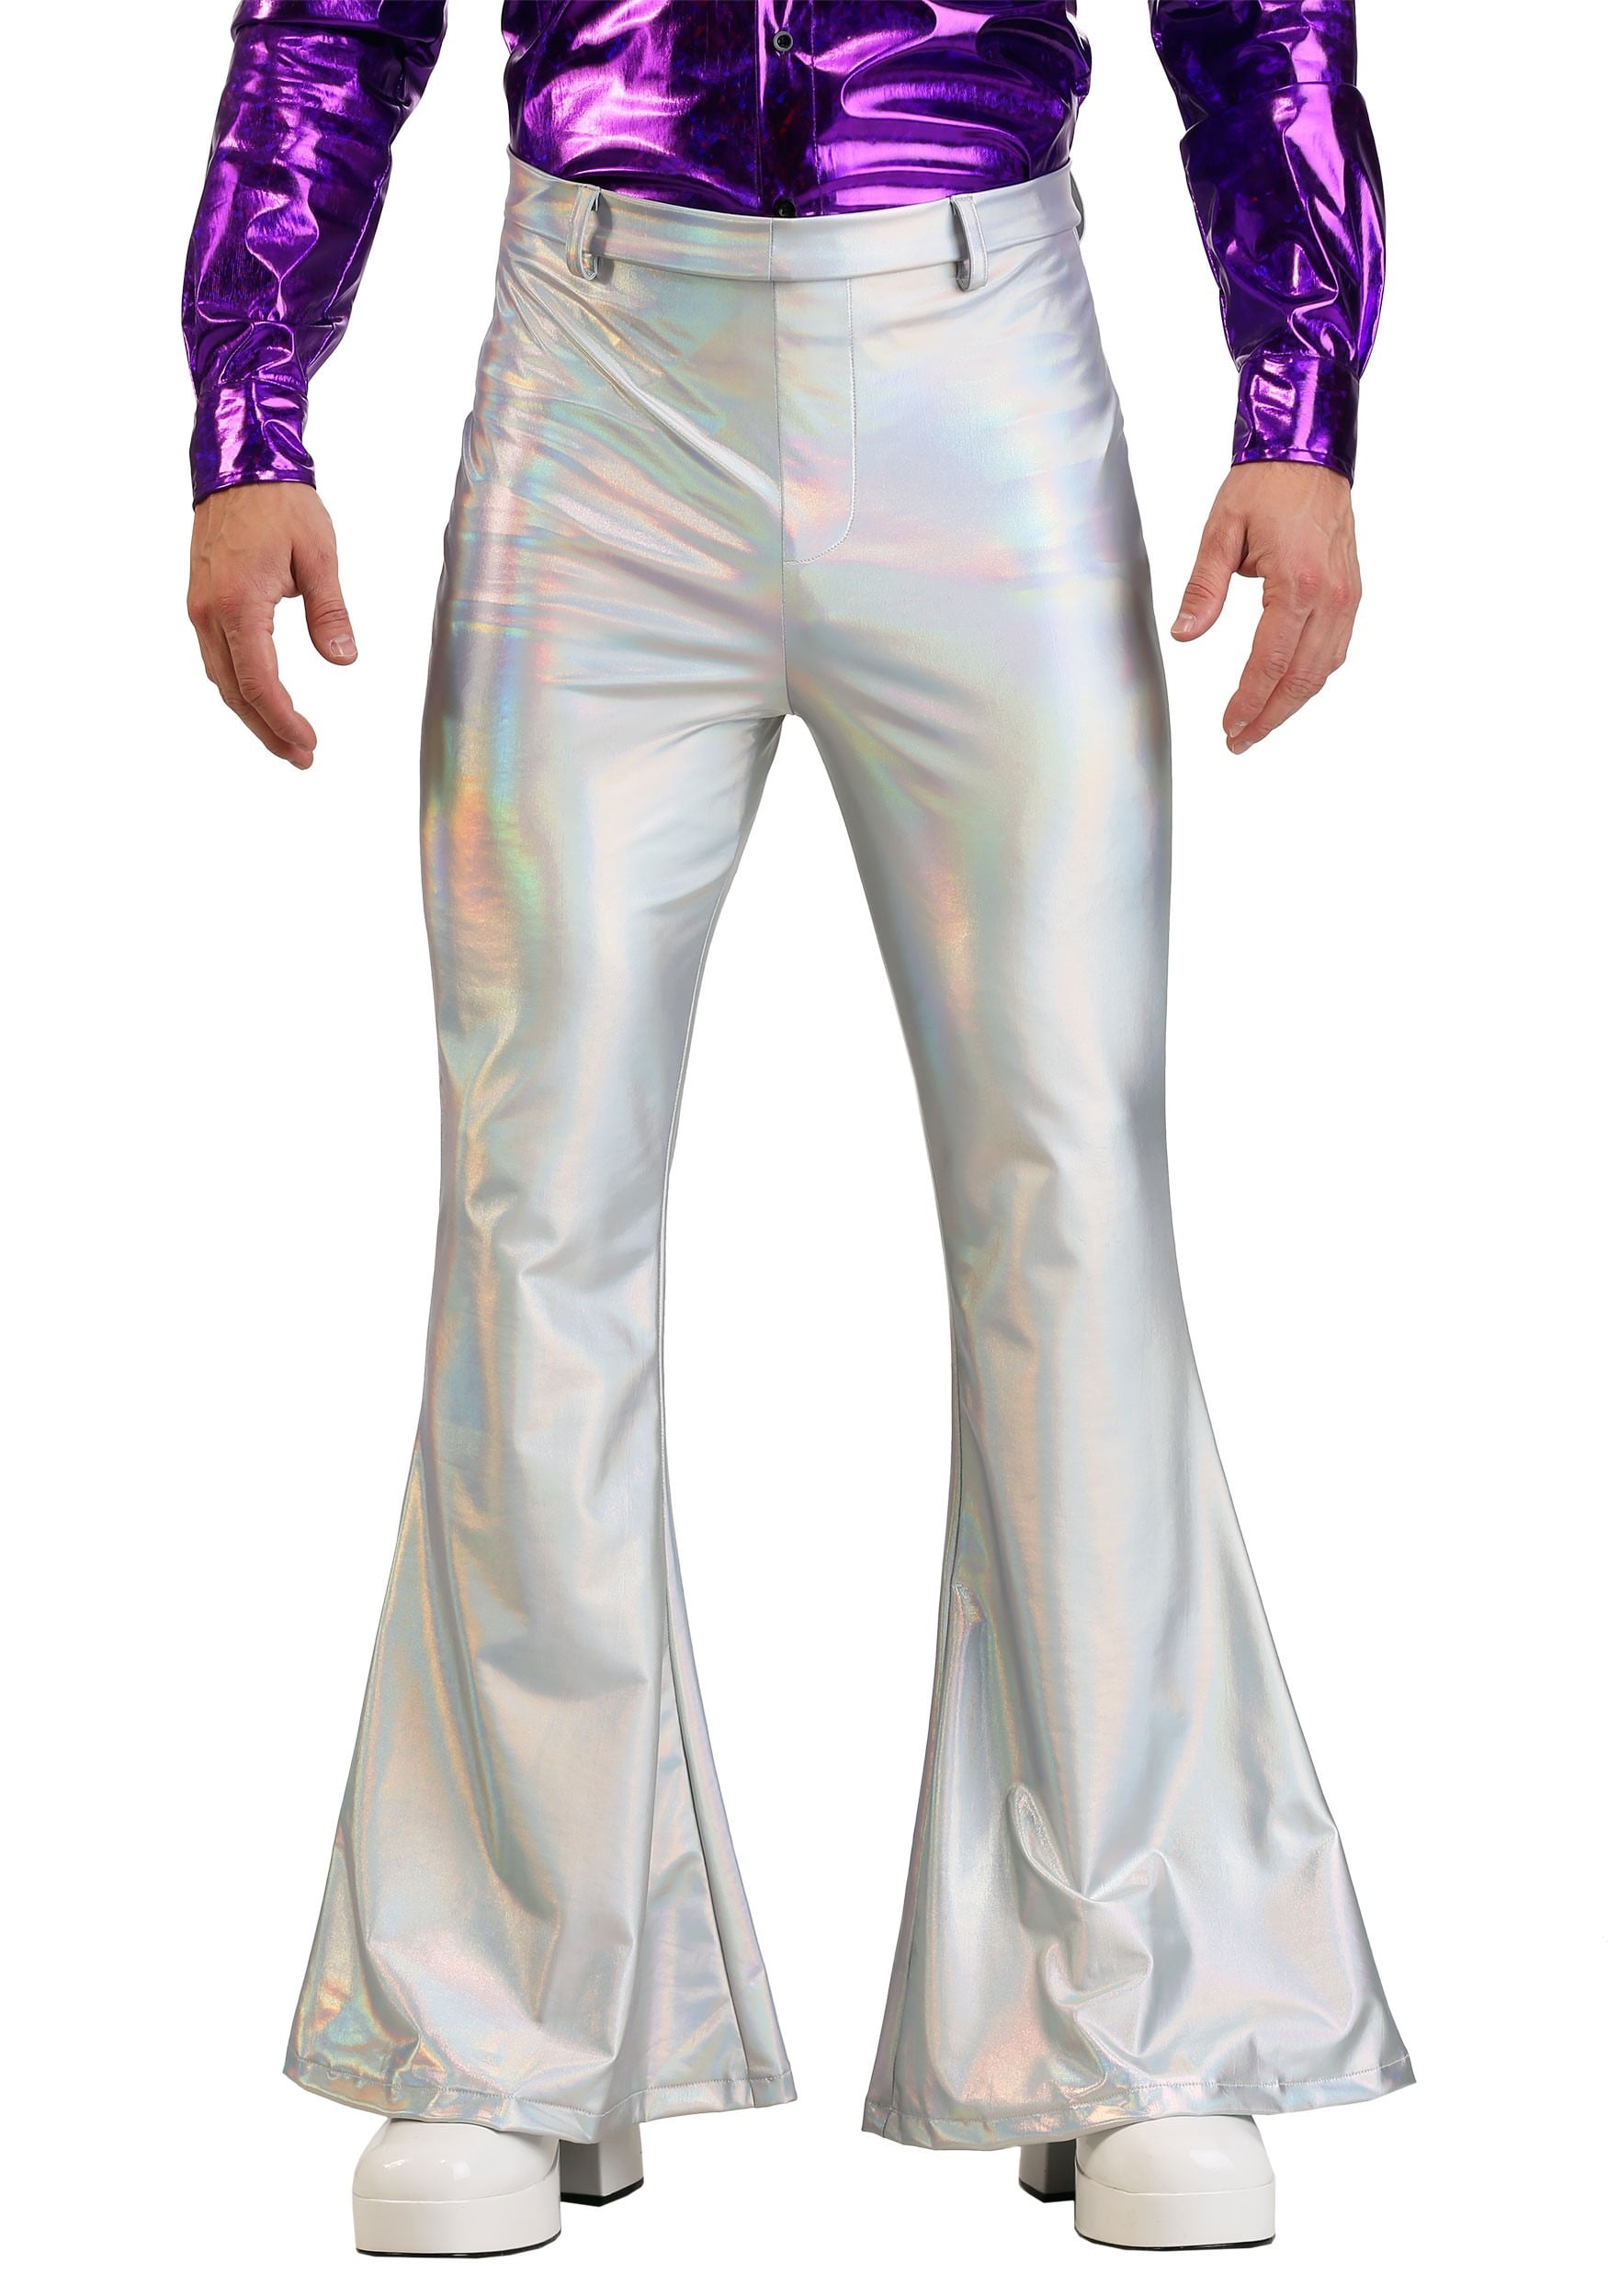 This is a Holographic Disco Pants for Men.